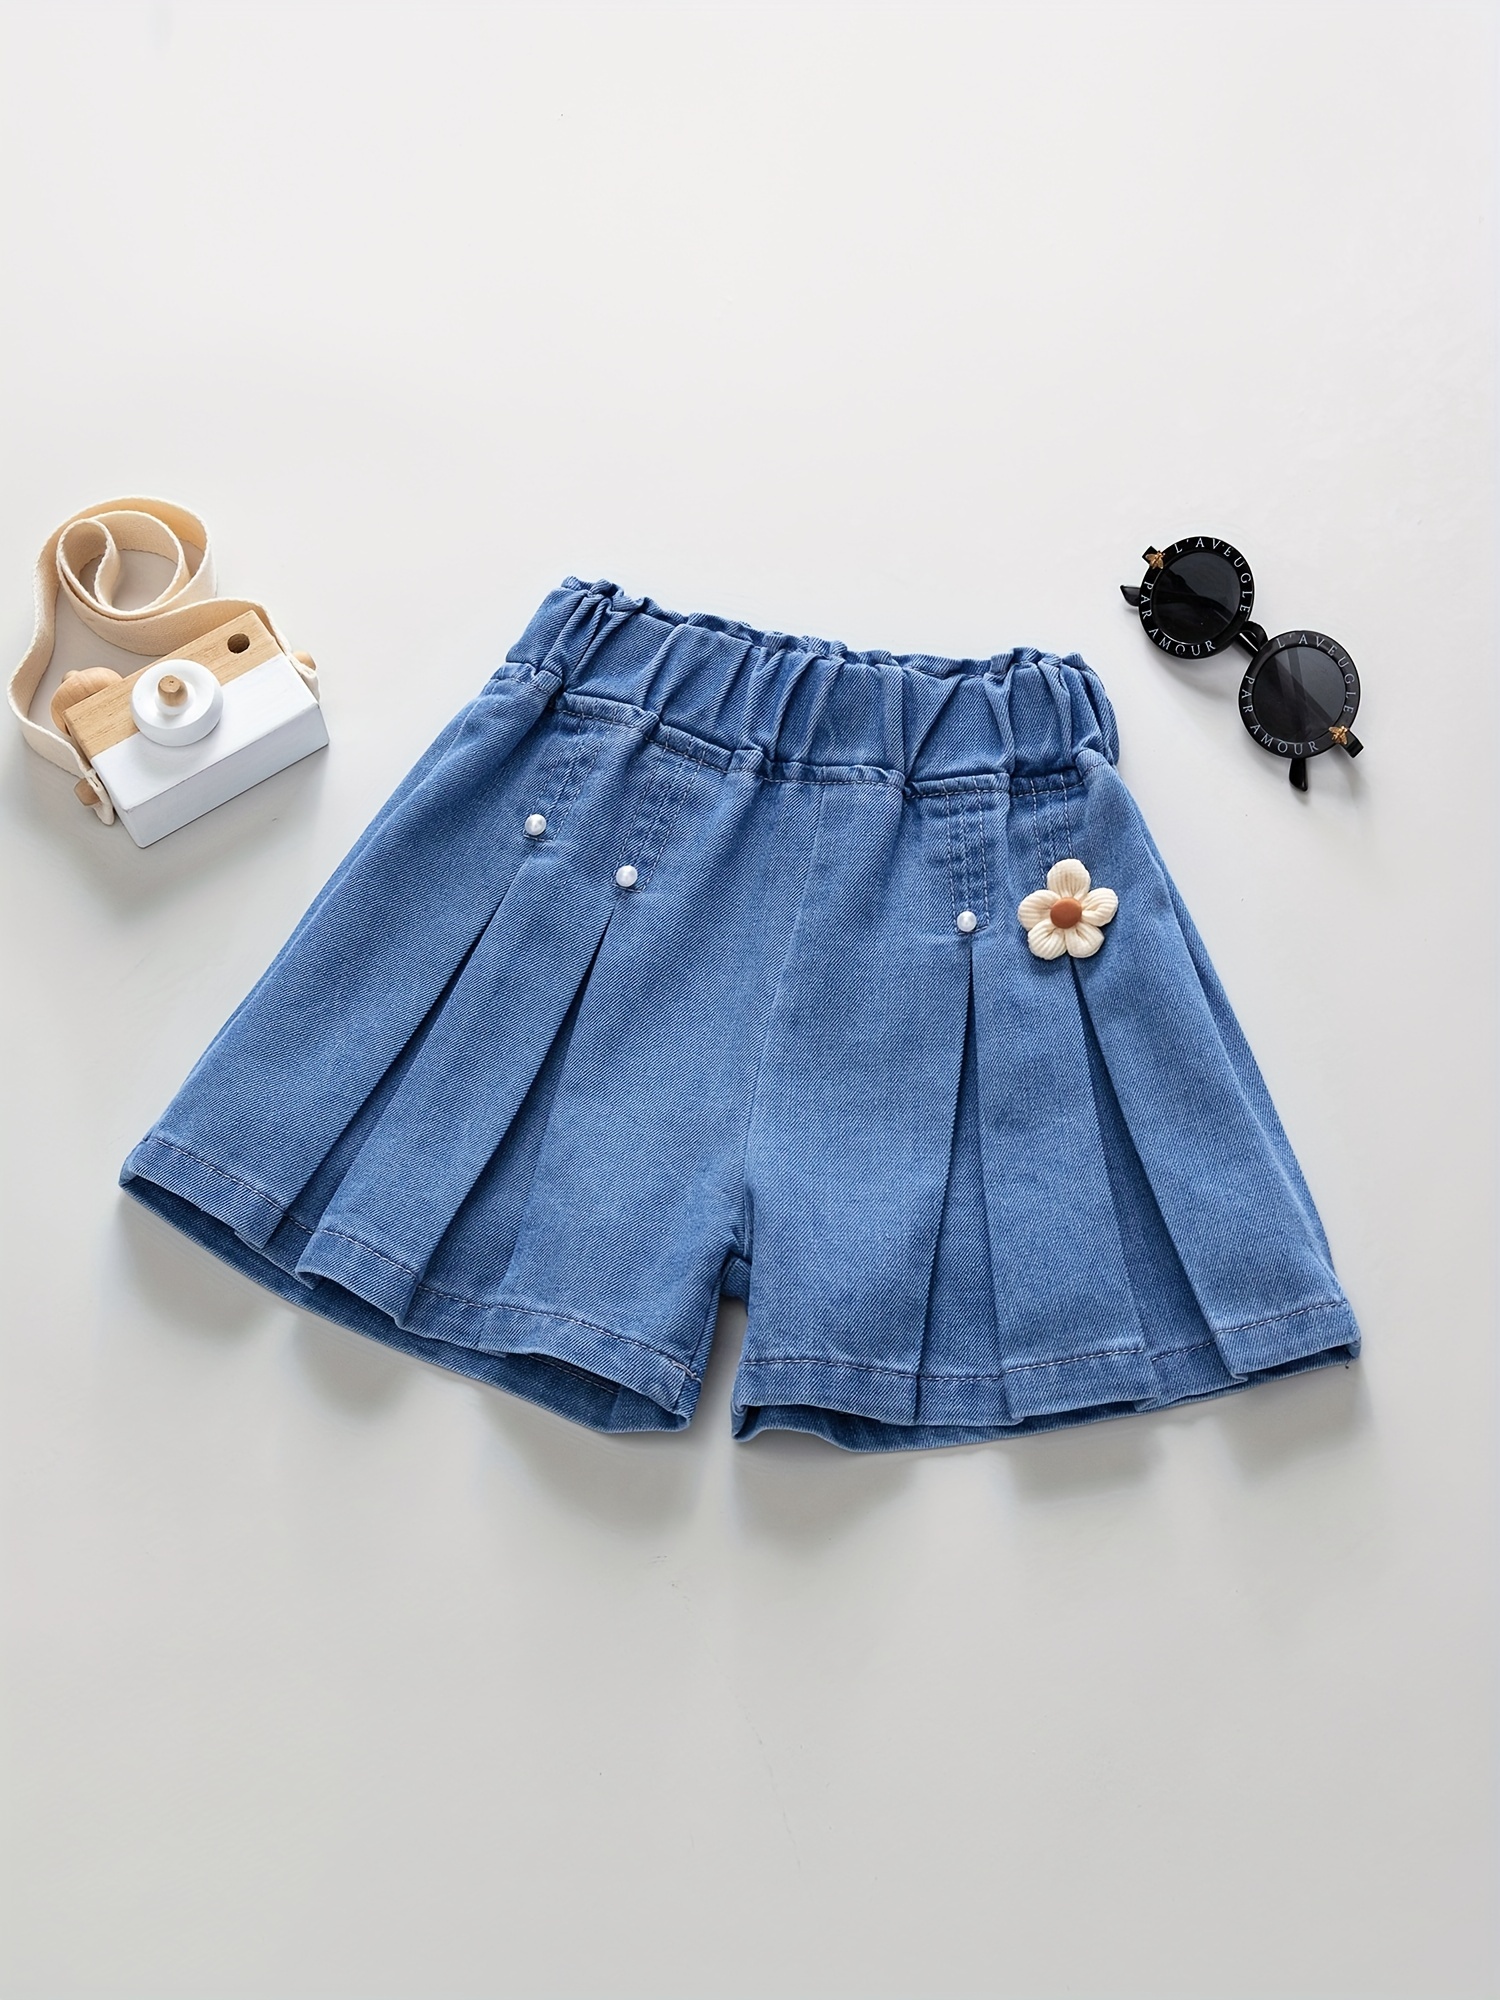 Girls' Denim Shorts, Girls' Denim Skirts, Girls' Denim Pleated Skirts,  Girls' Cute Style Shorts, Blue Denim Floral Shorts, Elastic Waist Shorts,  Loose Fitting Shorts, Suitable For Daily Wear, Suitable For Summer Or